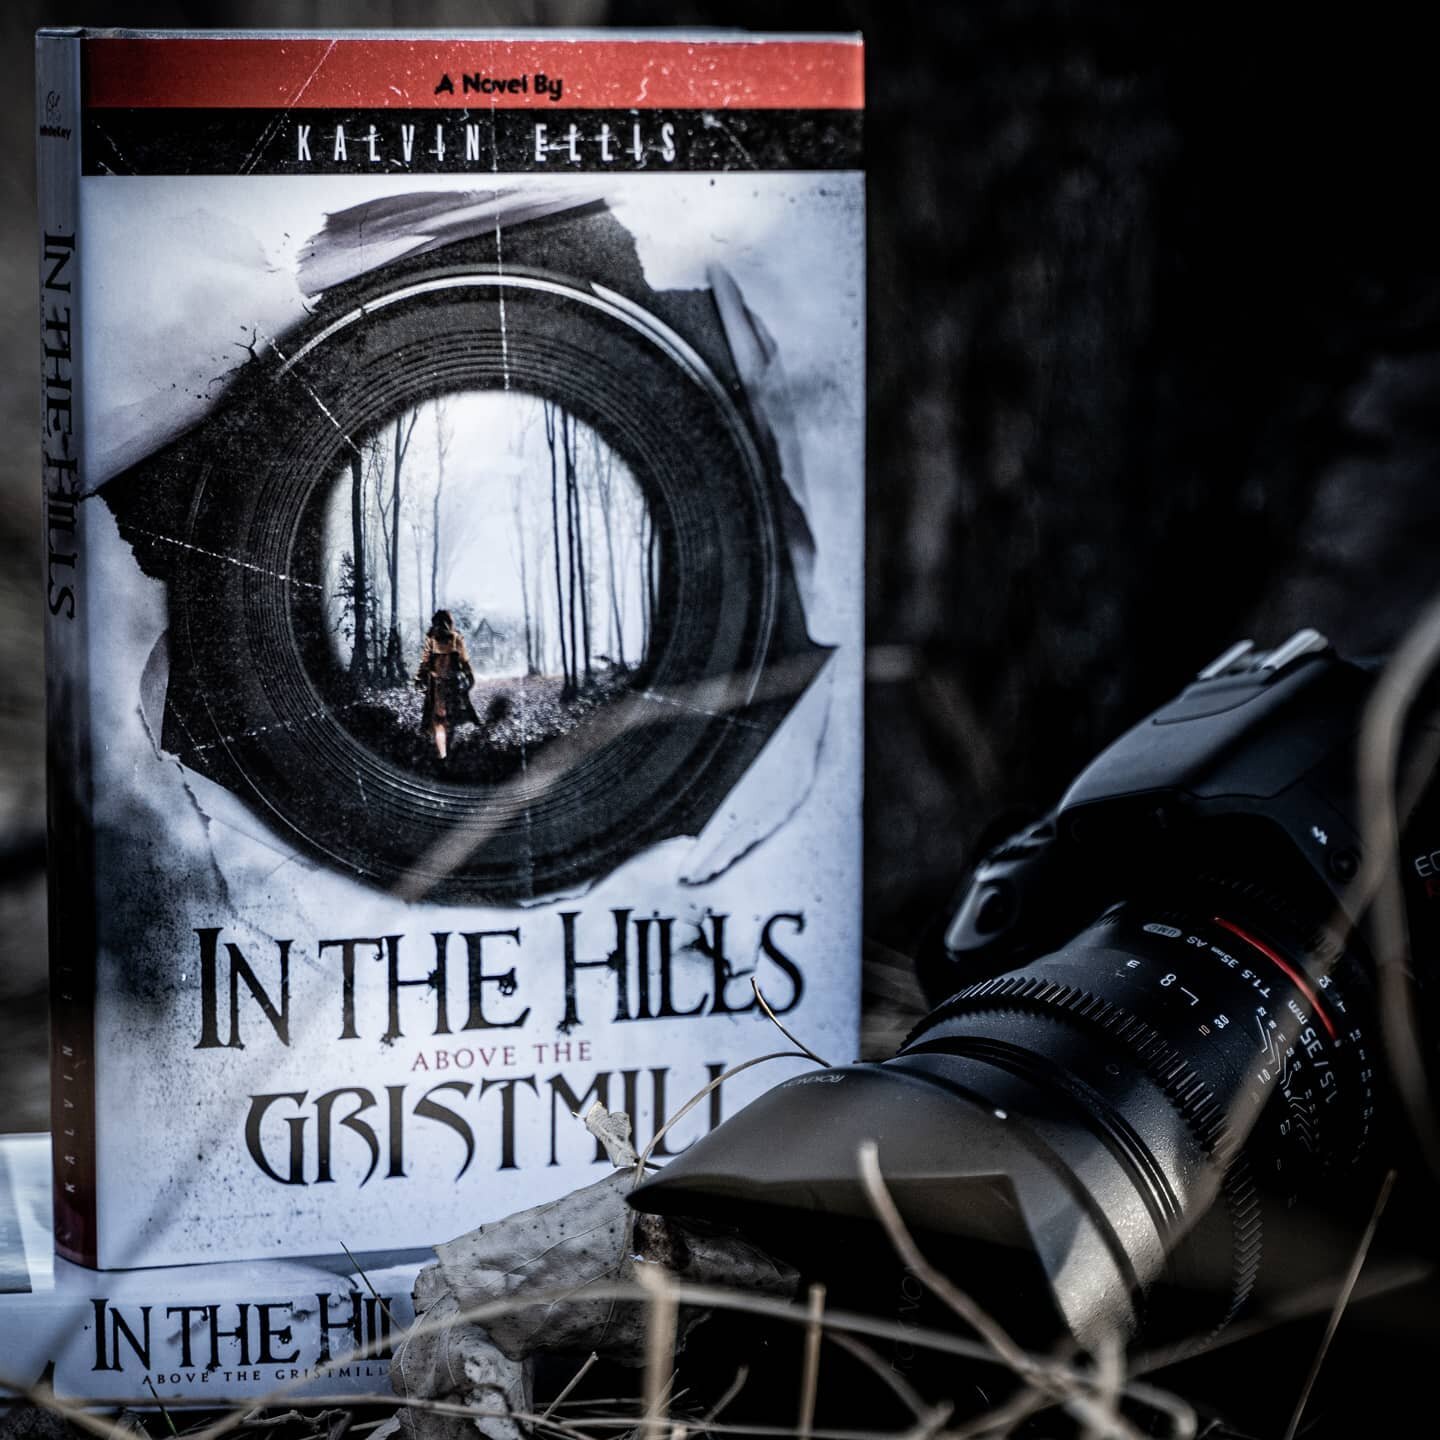 The release date was supposed to be 3/19 for the hardcover of In the Hills Above the Gristmill, but after getting the proofs back and seeing how good they look, we have opened then up for order! 
They are available on Amazon (link in bio). If there i